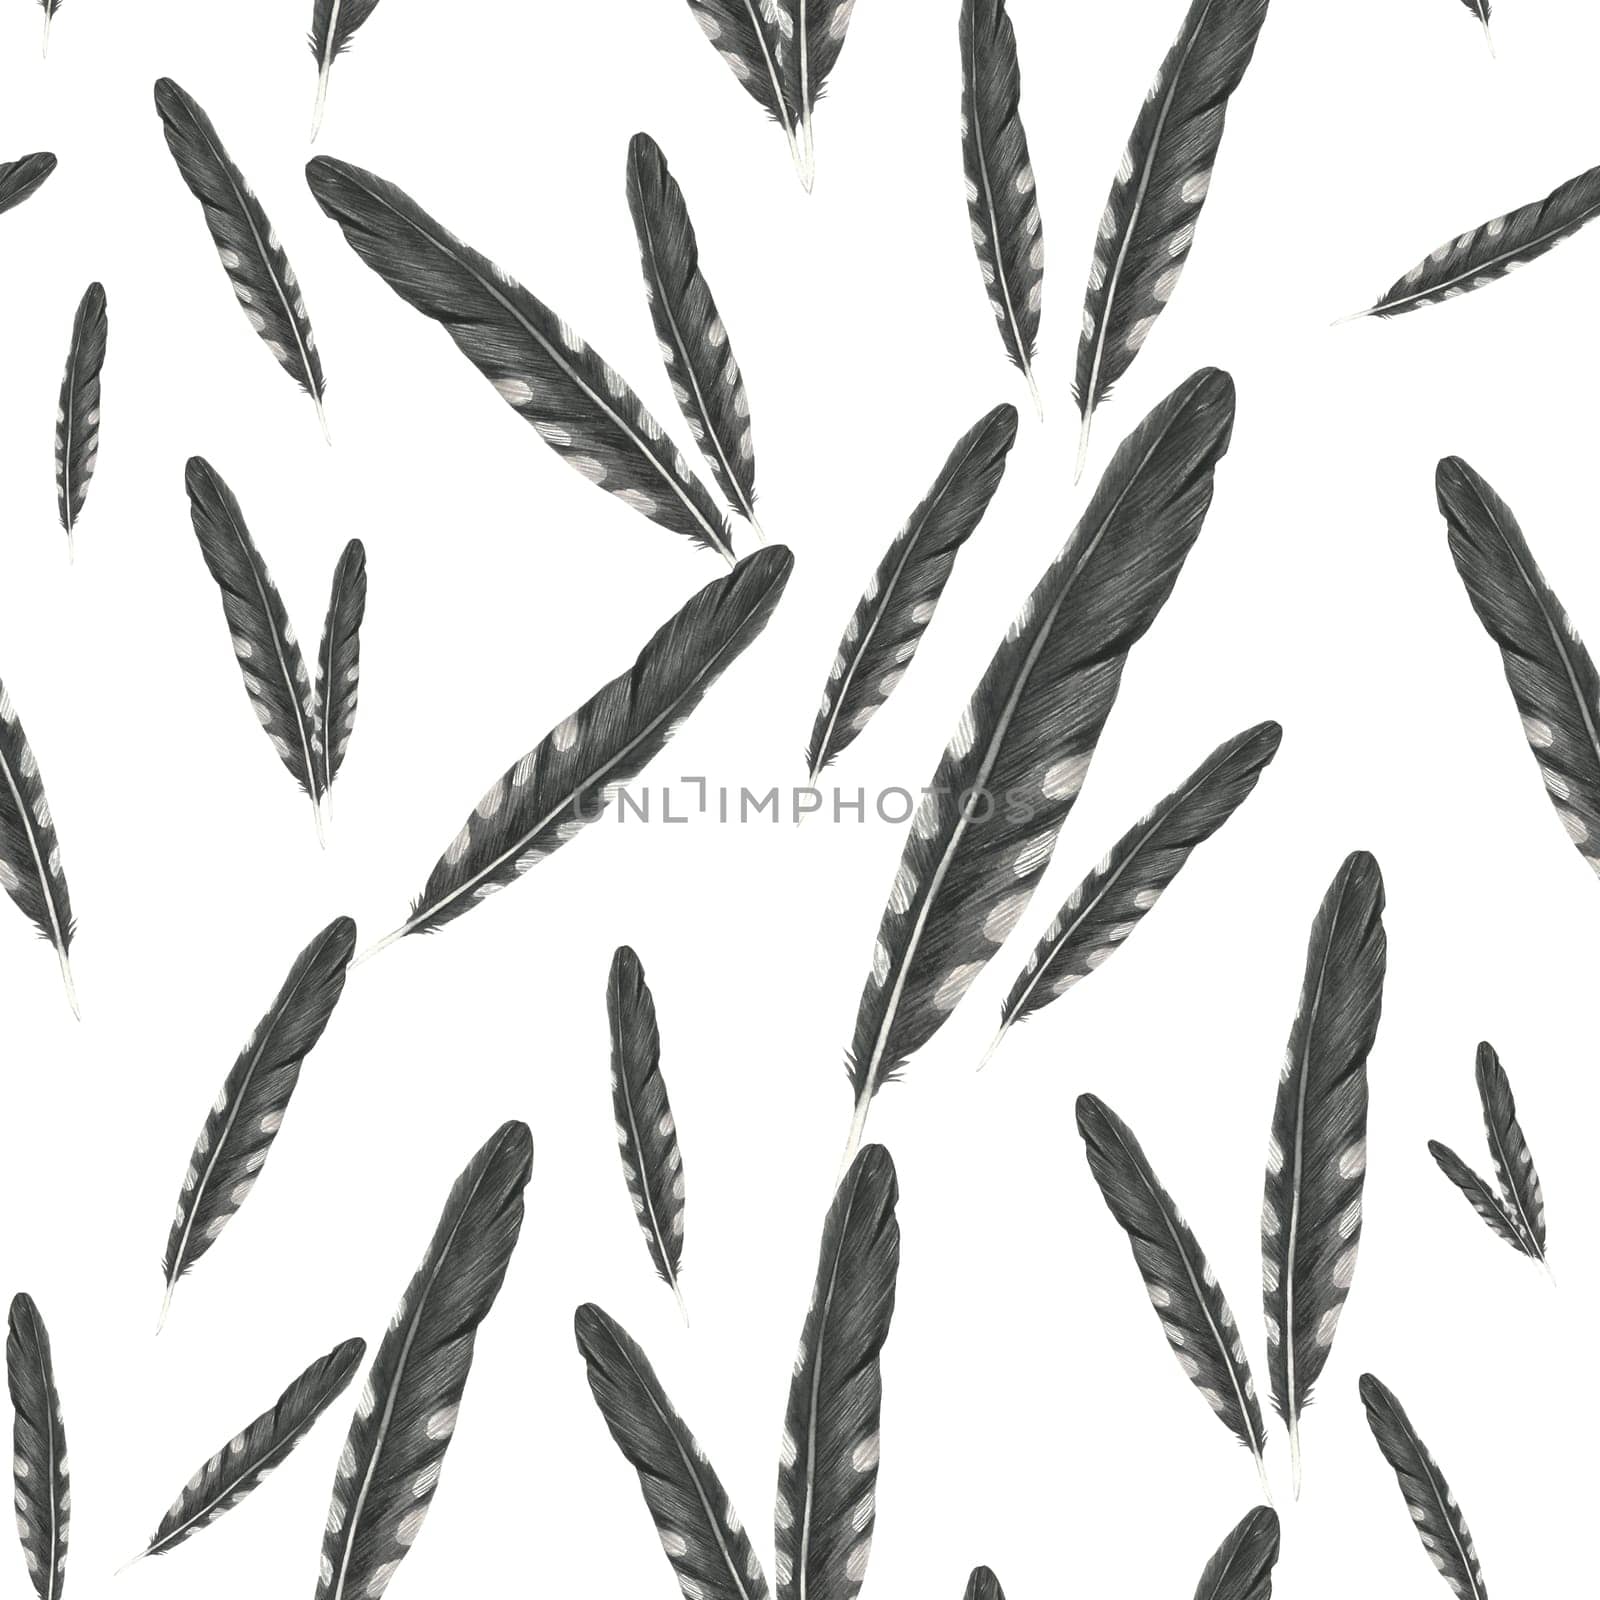 Seamless pattern watercolor illustration of cuckoo feathers, isolated on a white background hand drawn by OlSi